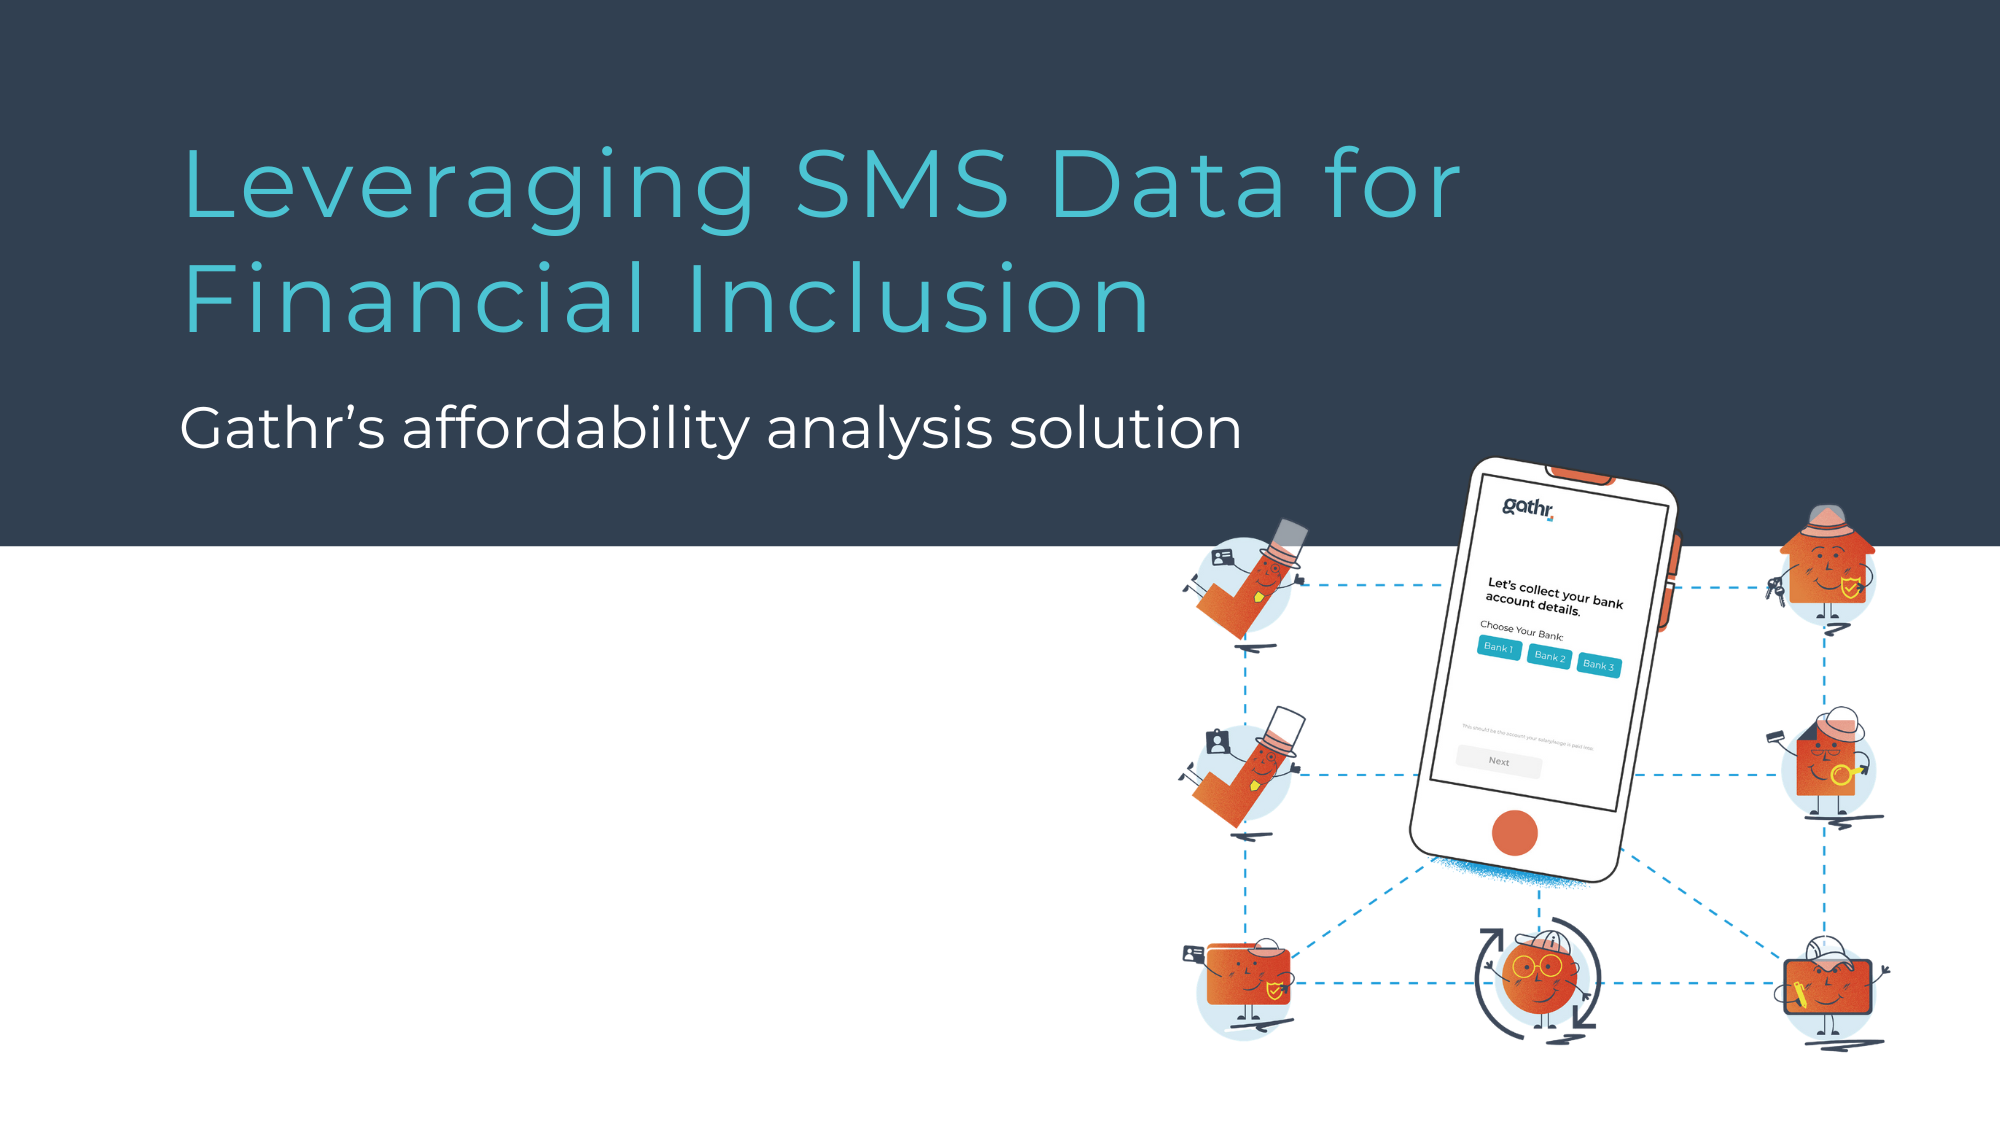 Leveraging SMS Data for financial inclusion